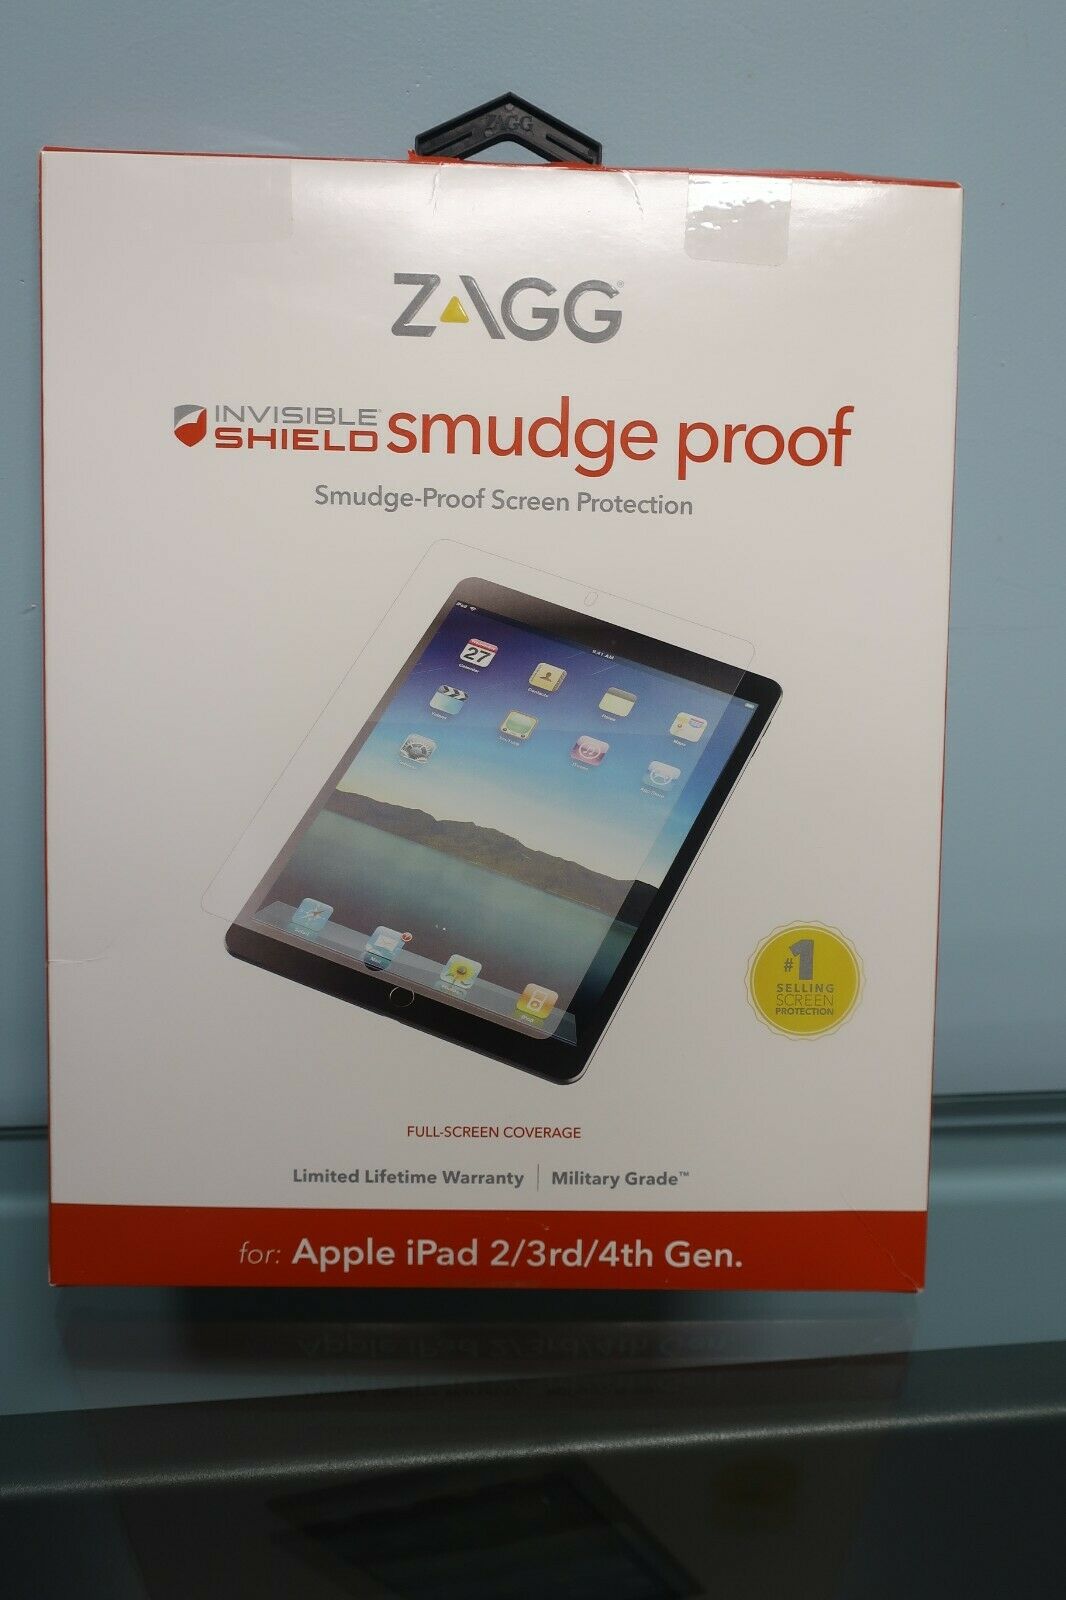 ZAGG SCREEN SCREEN 234 SMUDGEPROOF